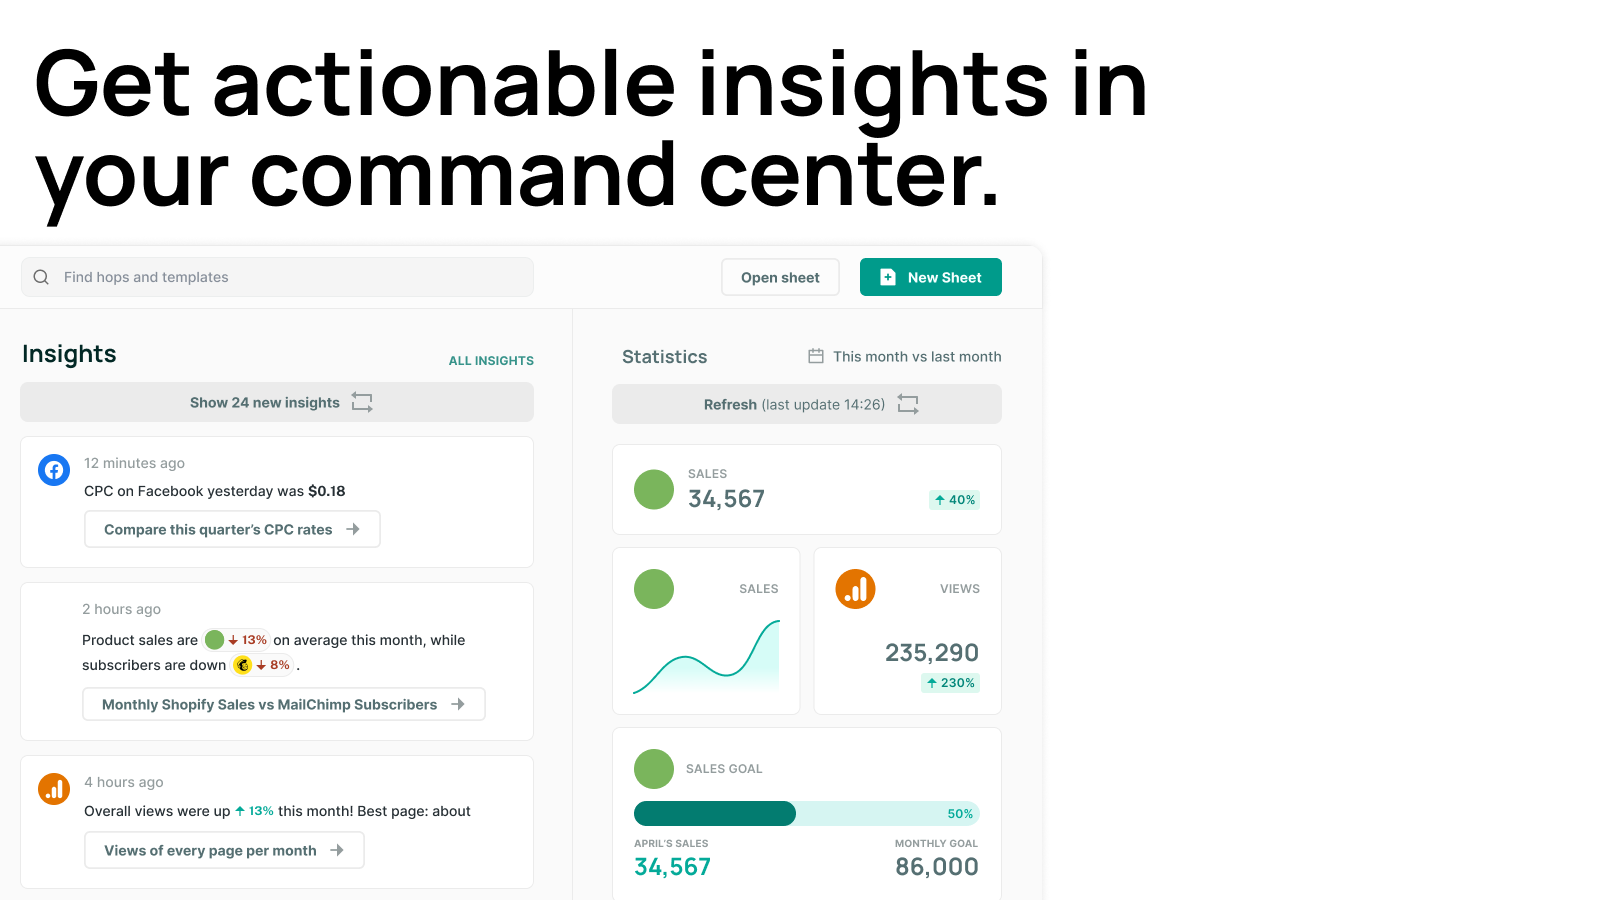 Get actionable insights in your command center.